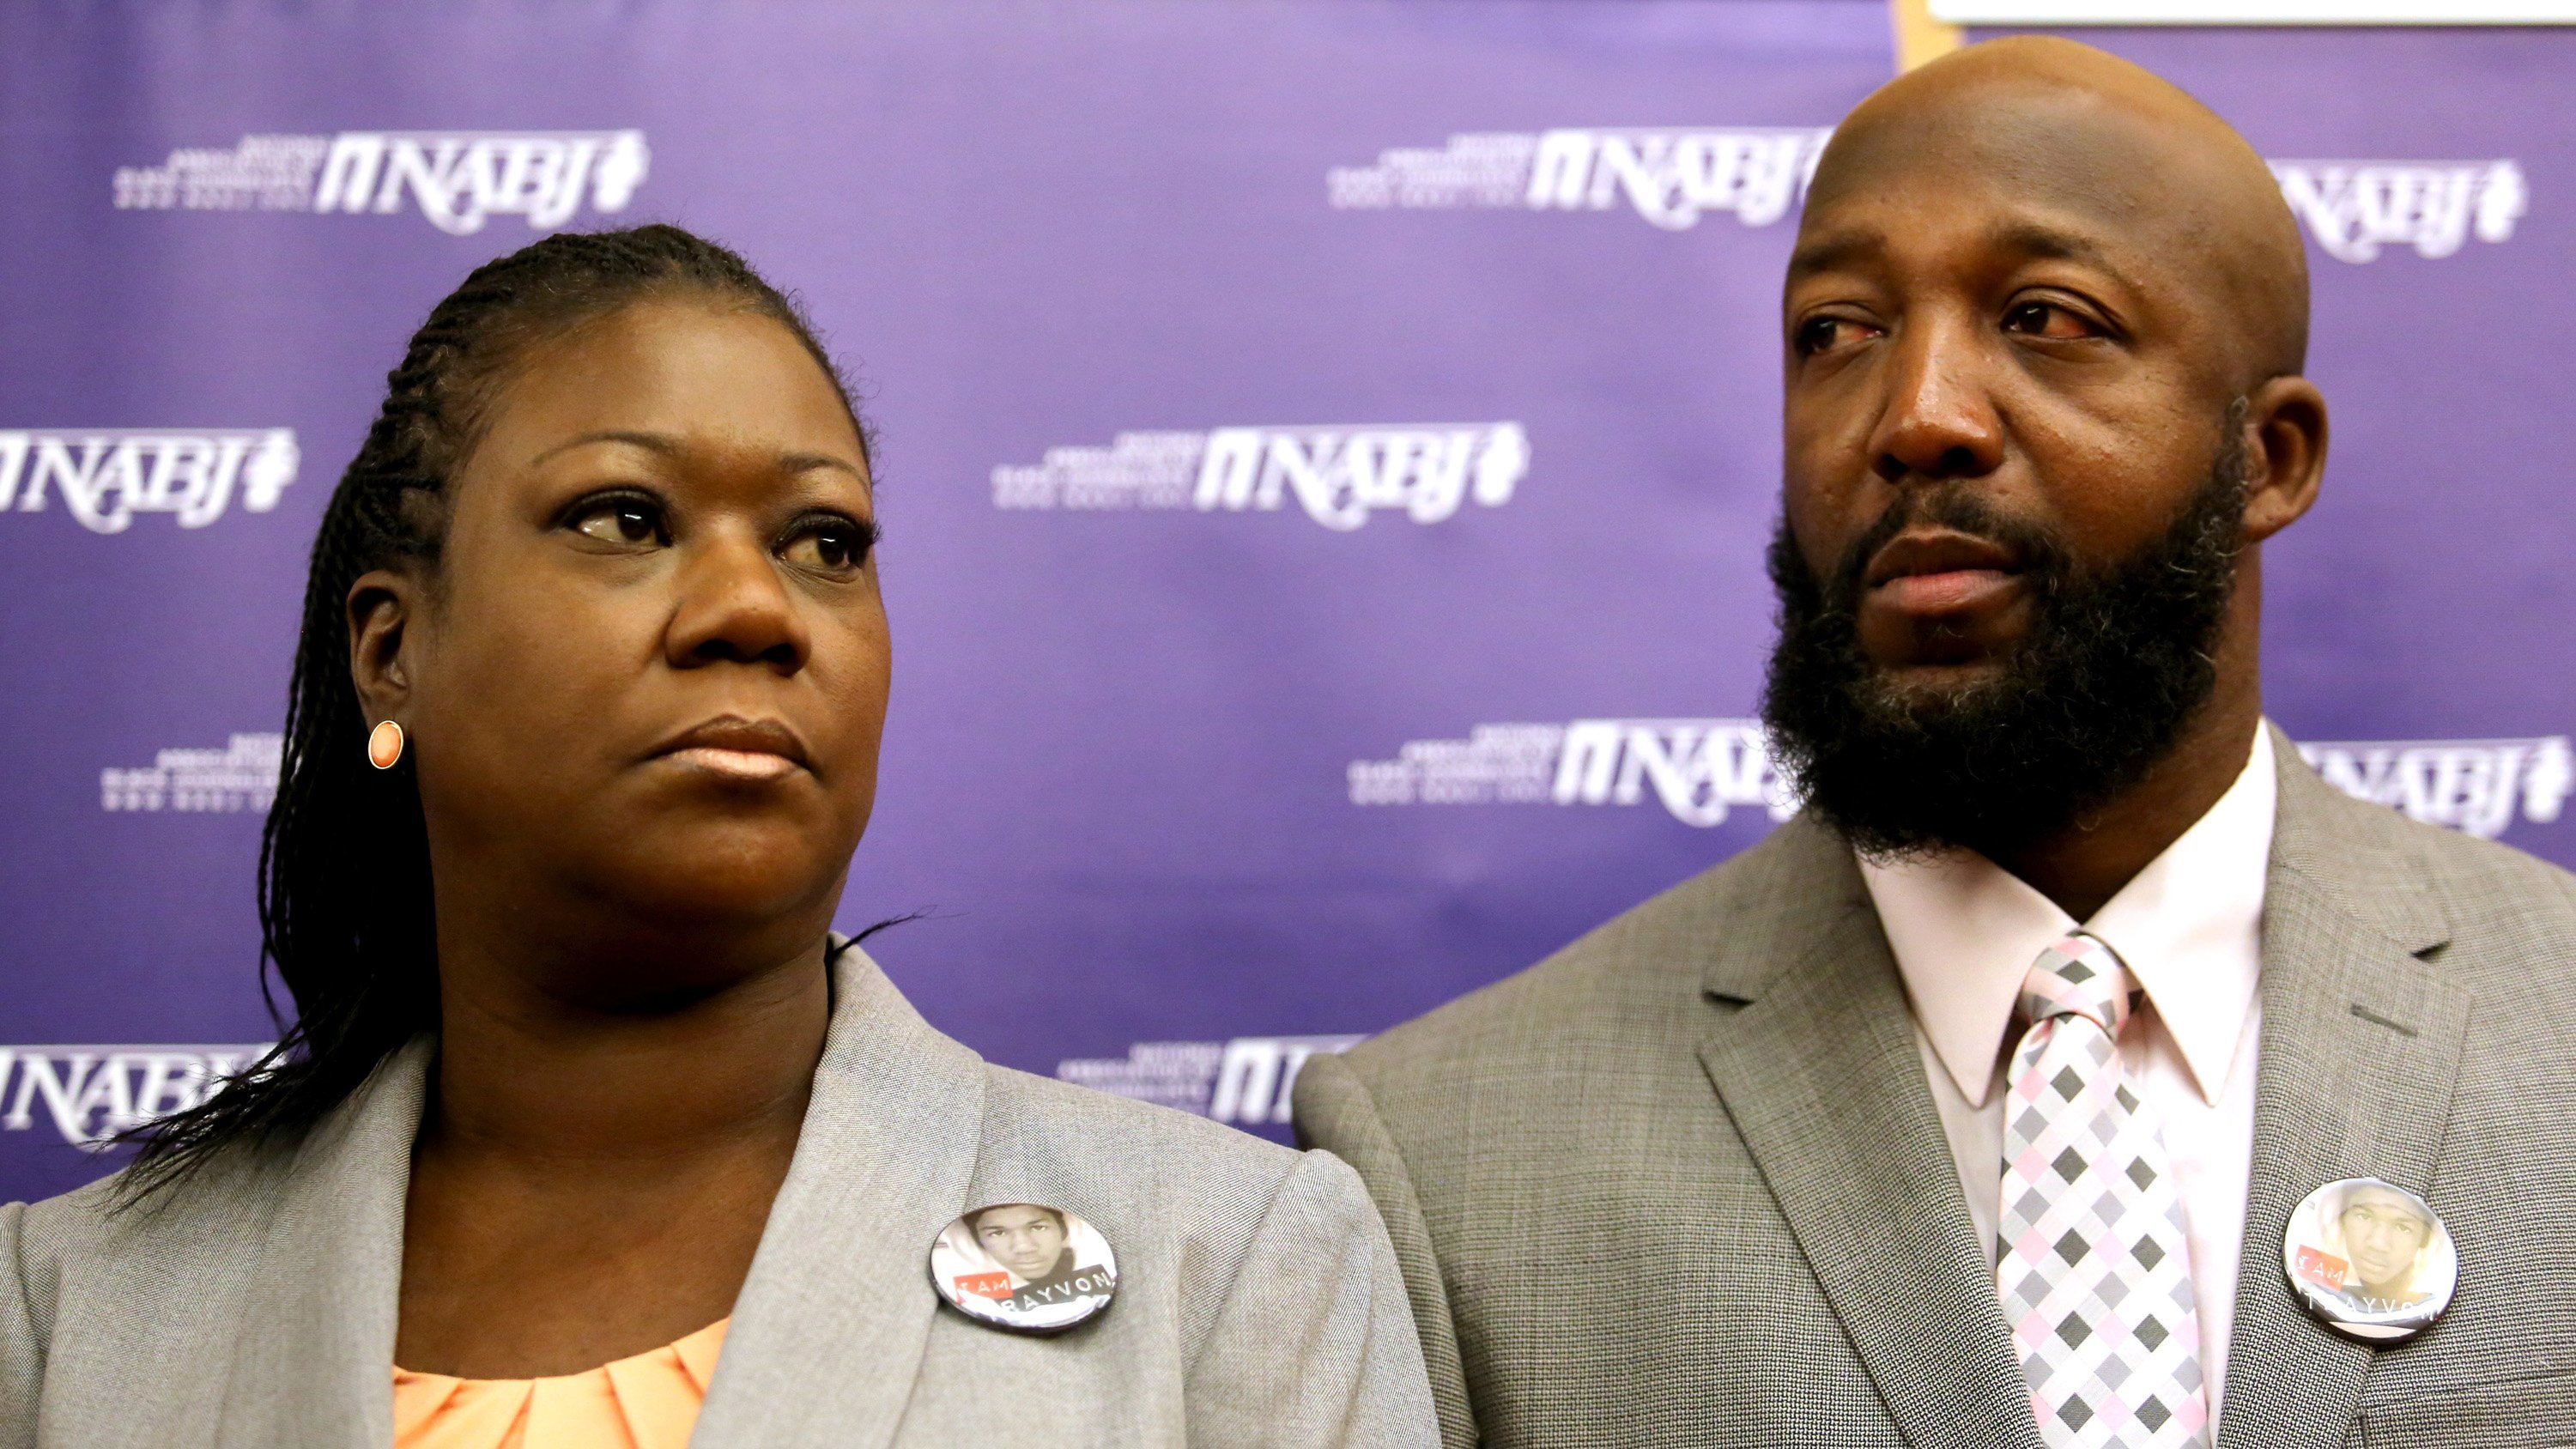 The parents of Trayvon Martin, Sybrina Fulton, left, and Tracy Martin, listen to their attorneys, during a news conference at the National Association of Black Journalists national convention, in Orlando, Florida, Friday, August 2, 2013. (Joe Burbank/Orlando Sentinel&mdash;MCT/Getty Images)